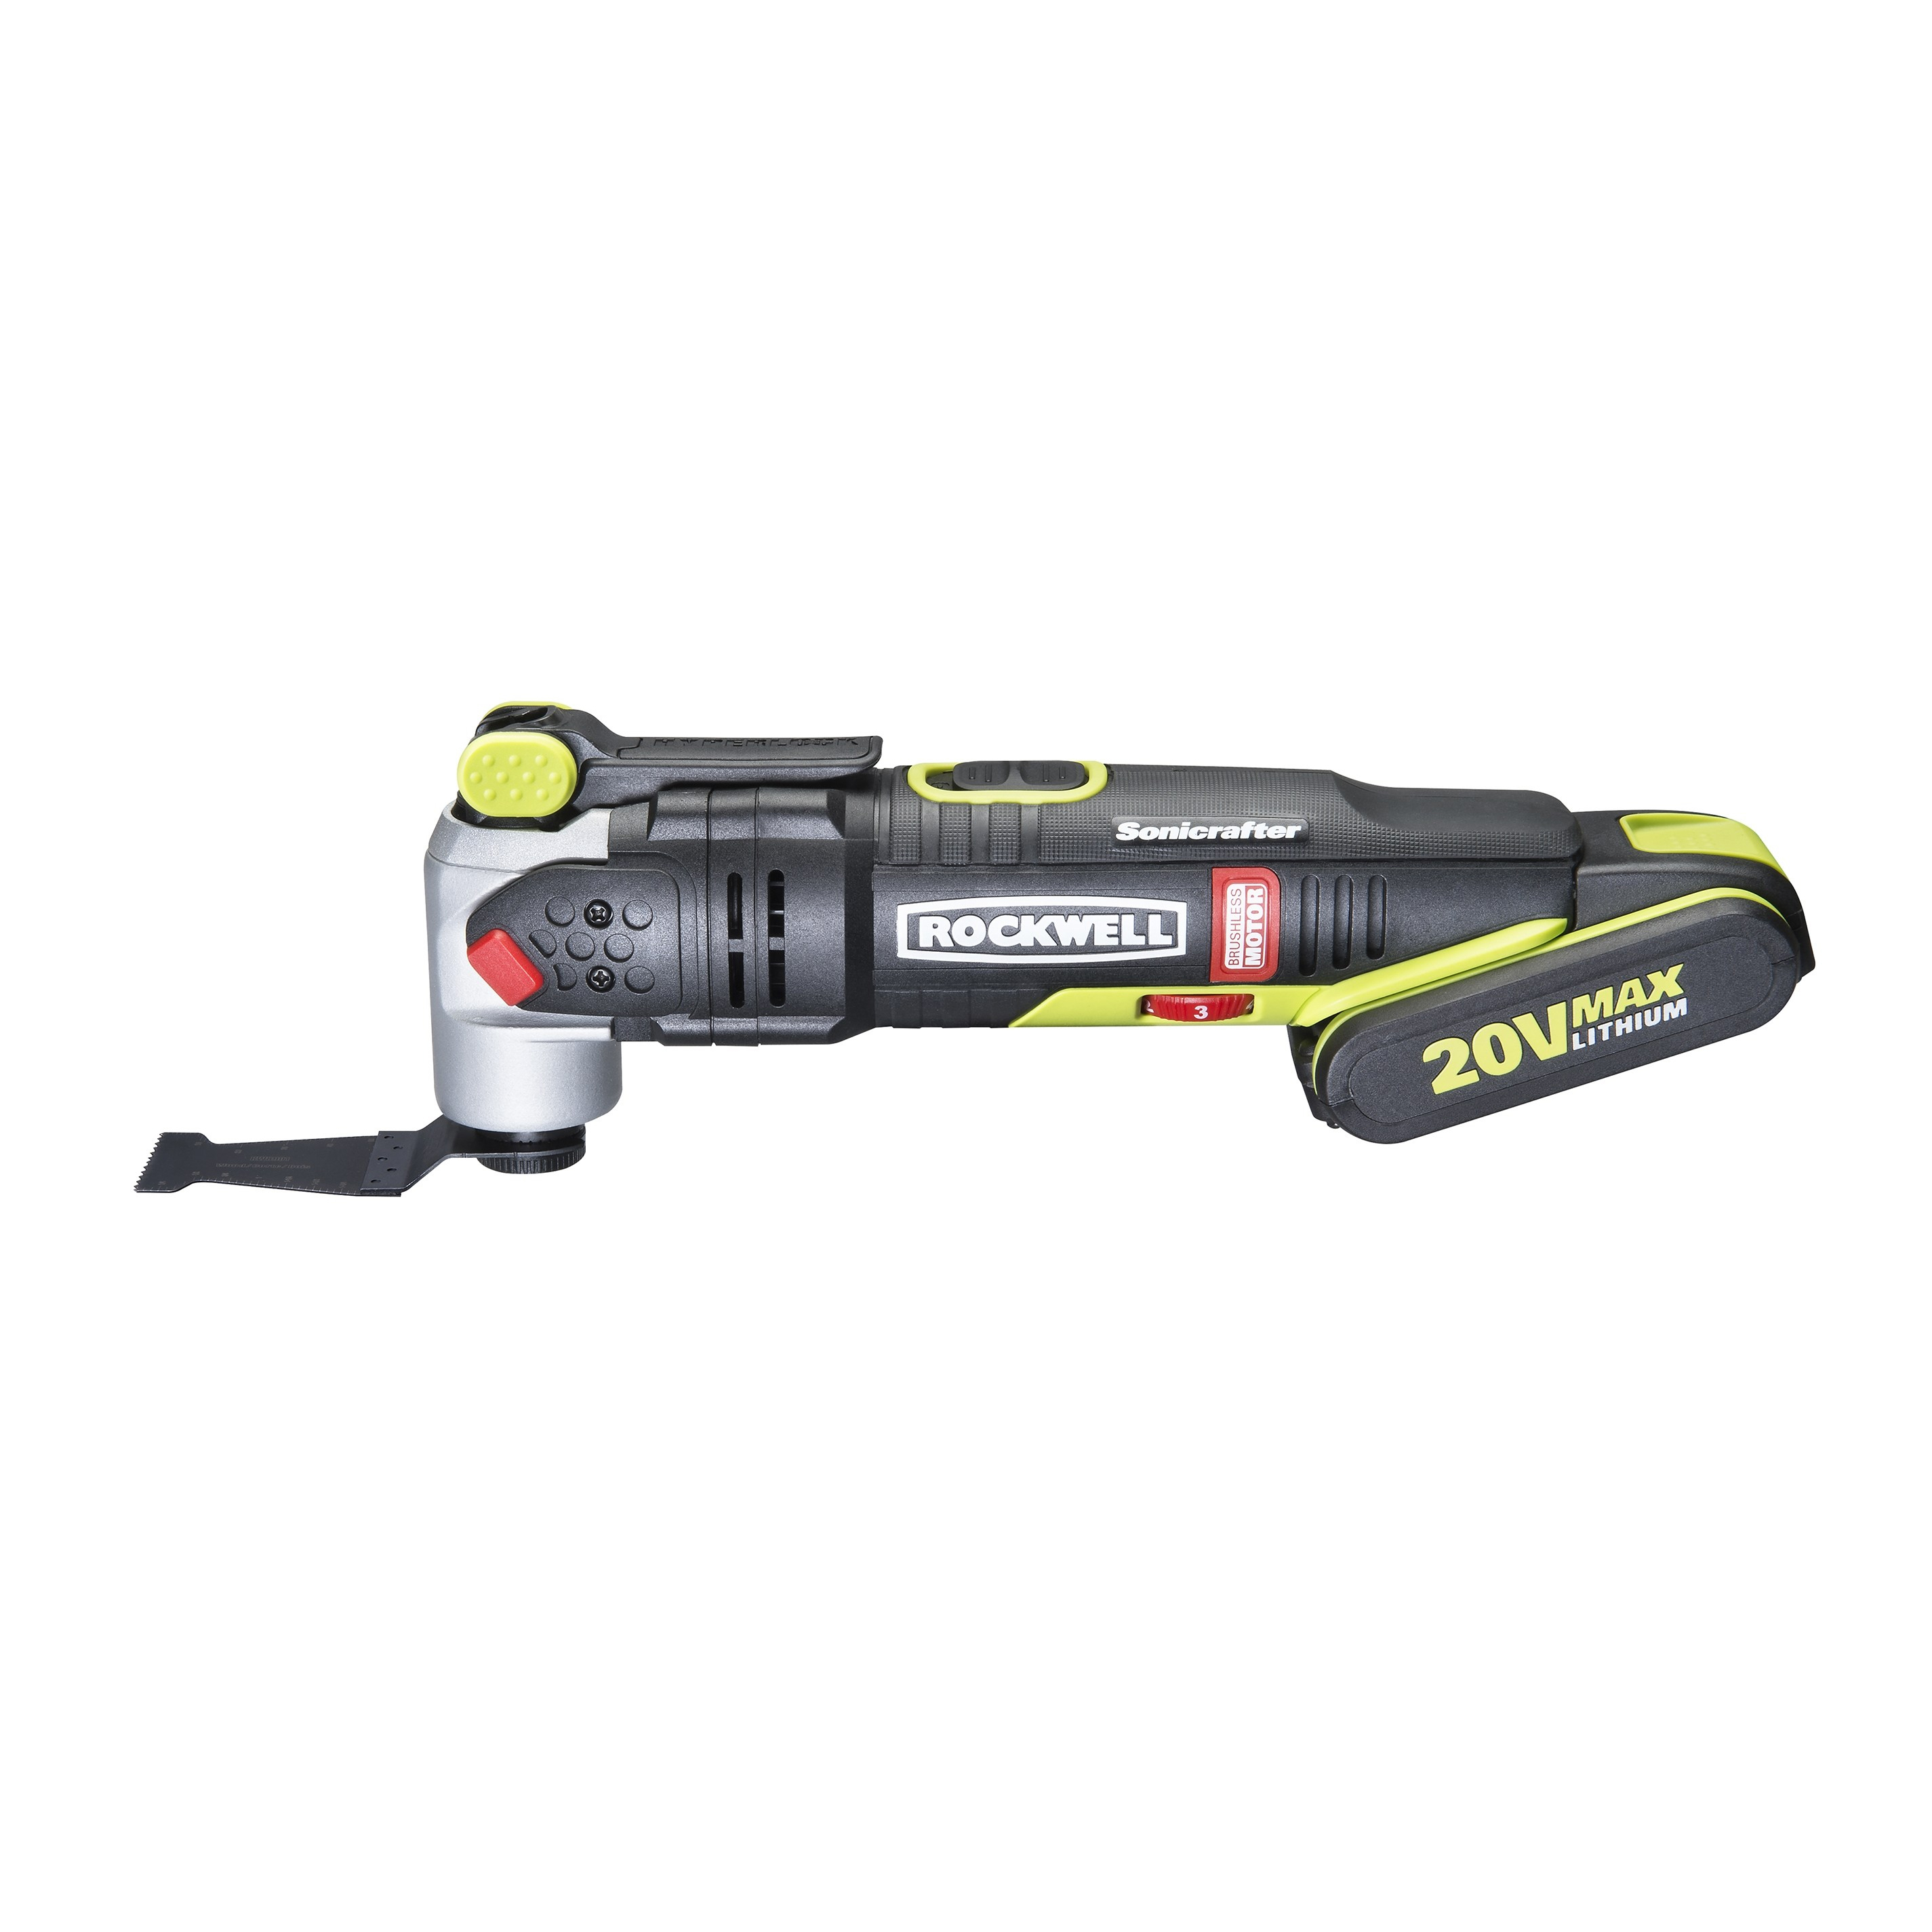 MaxLithium Brushless Sonicrafter - Rockwell